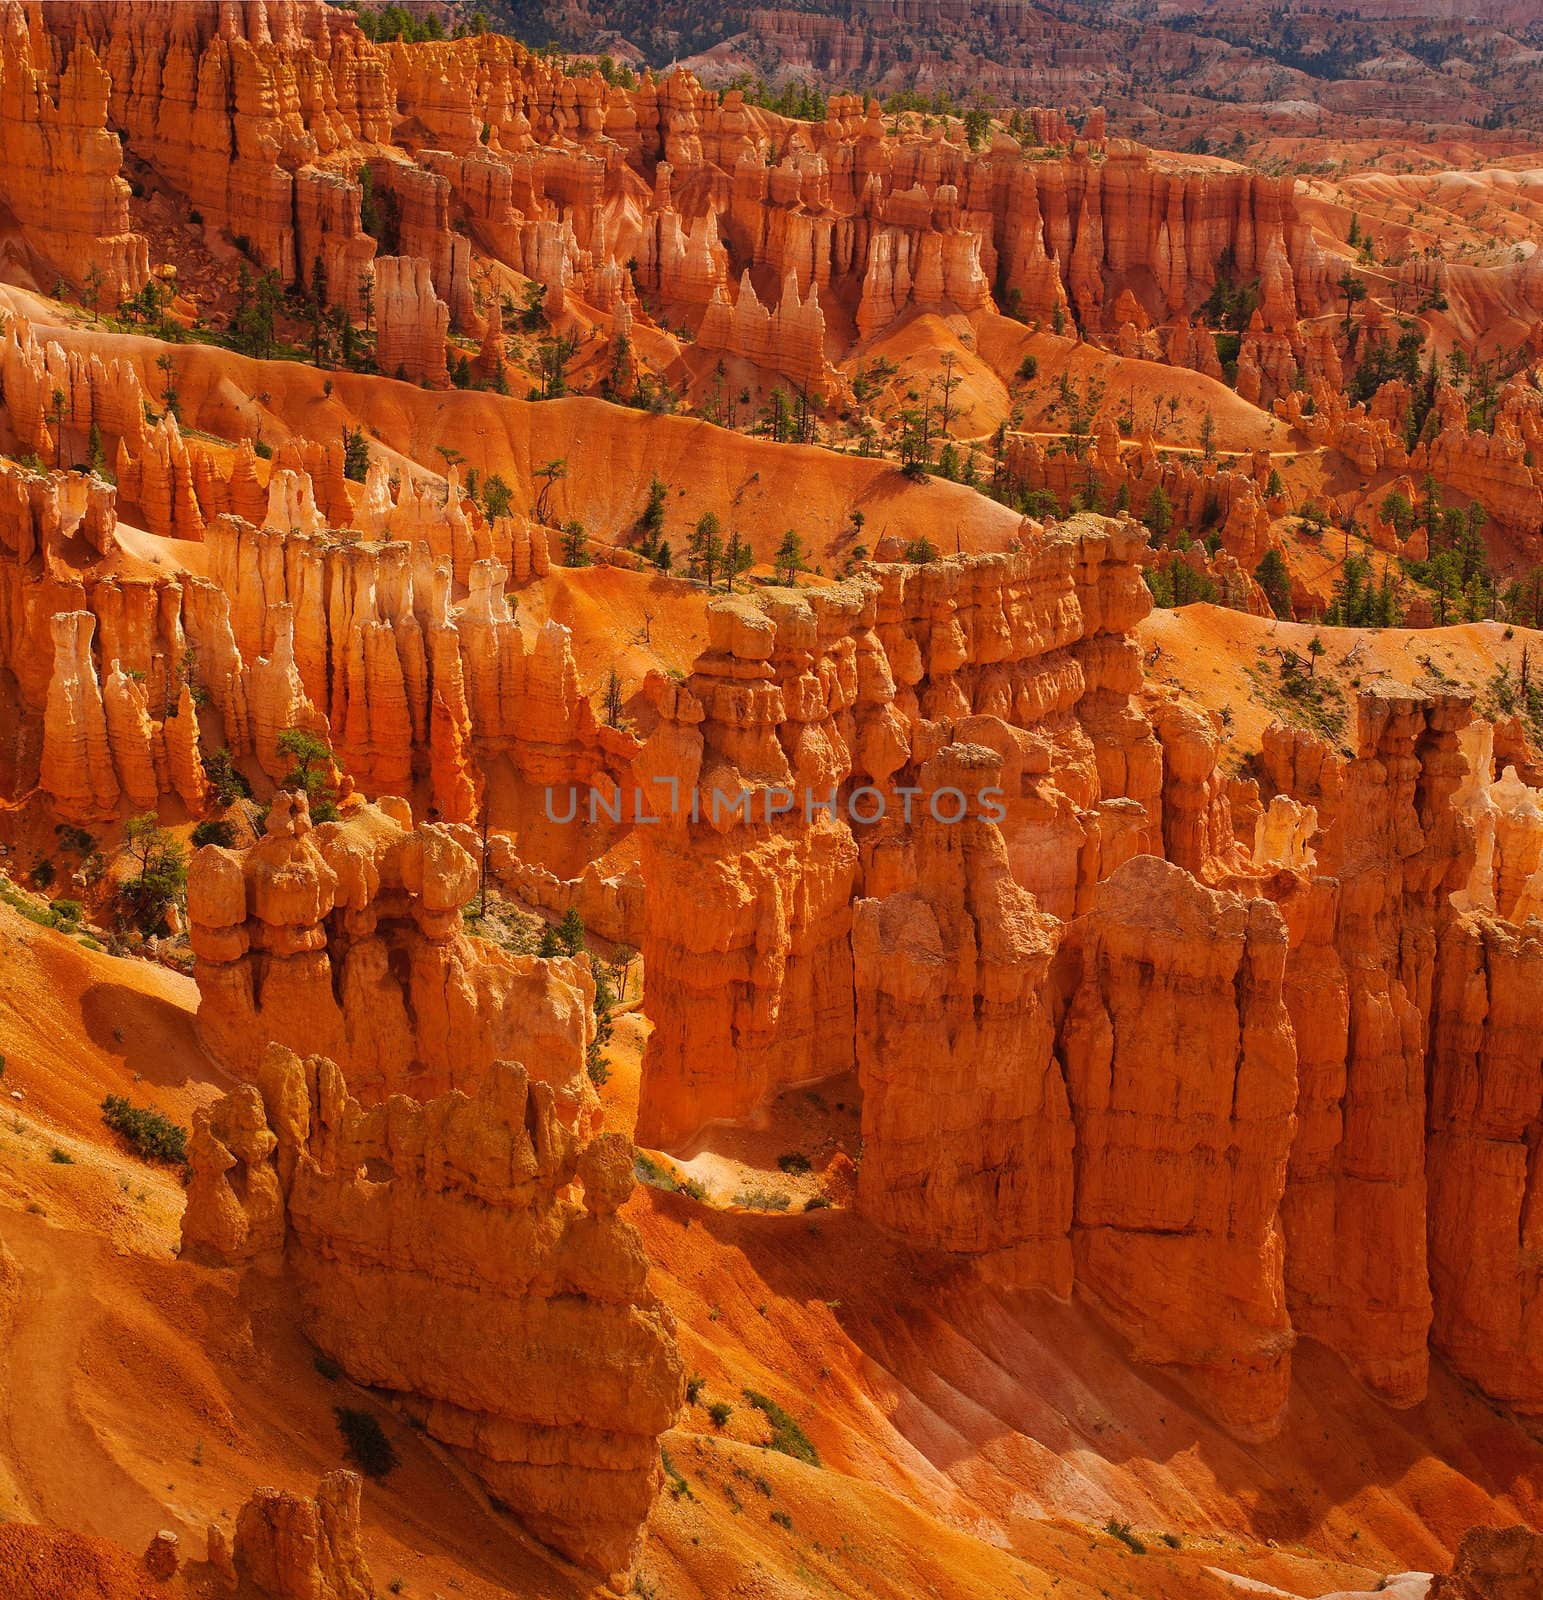 view of the hoodoo's in Bryce Canyon, Utah